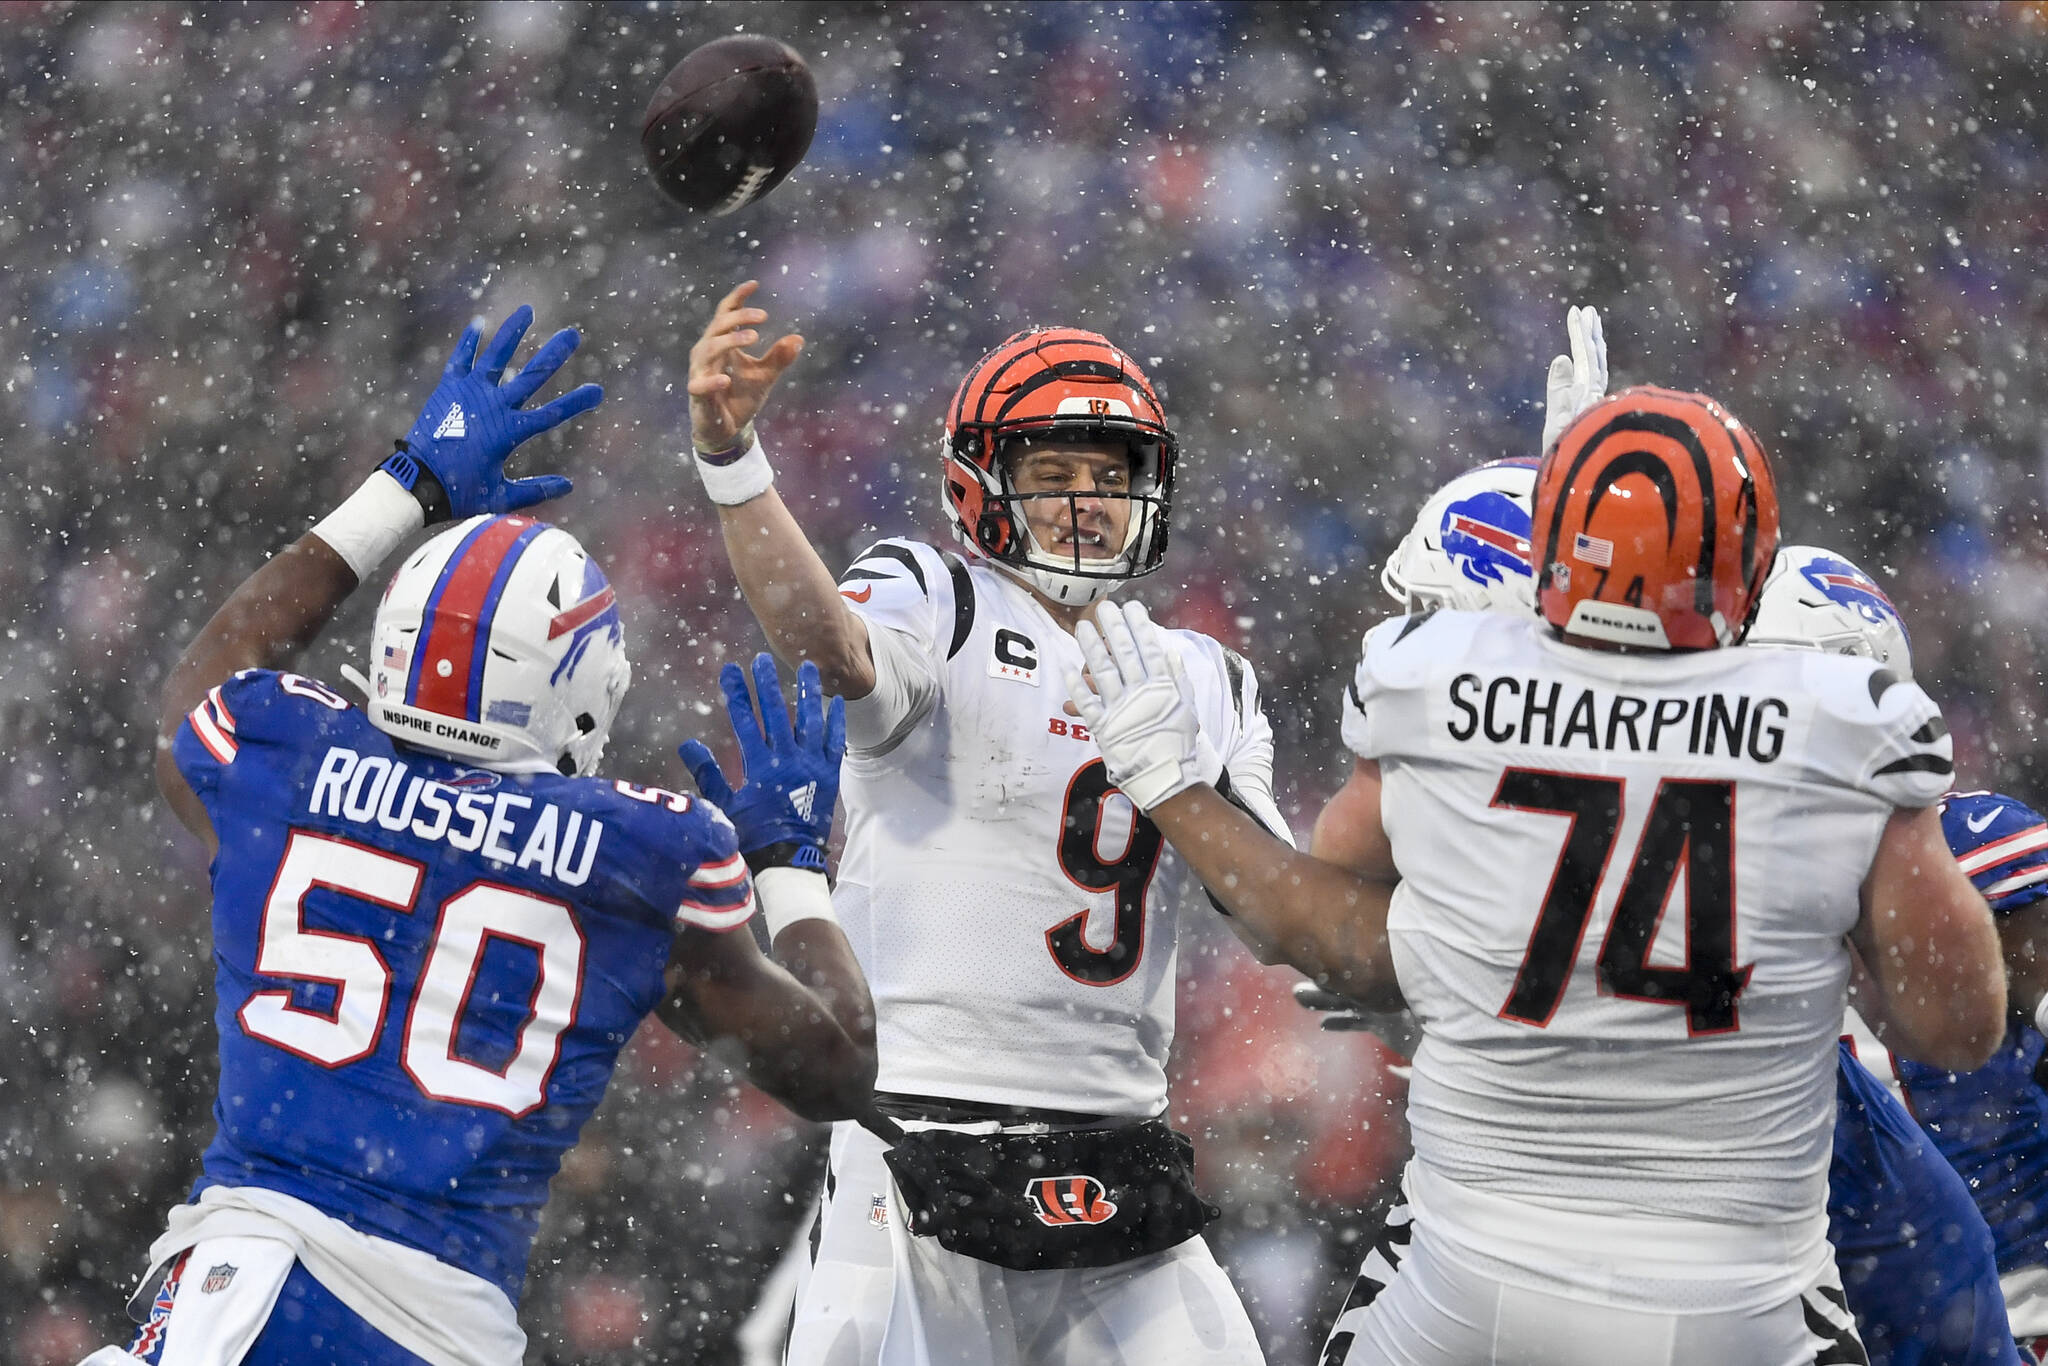 Cincinnati Bengals quarterback Joe Burrow (9) passes against the Buffalo Bills during the second quarter of an NFL division round football game, Sunday, Jan. 22, 2023, in Orchard Park, N.Y. (AP Photo/Adrian Kraus)